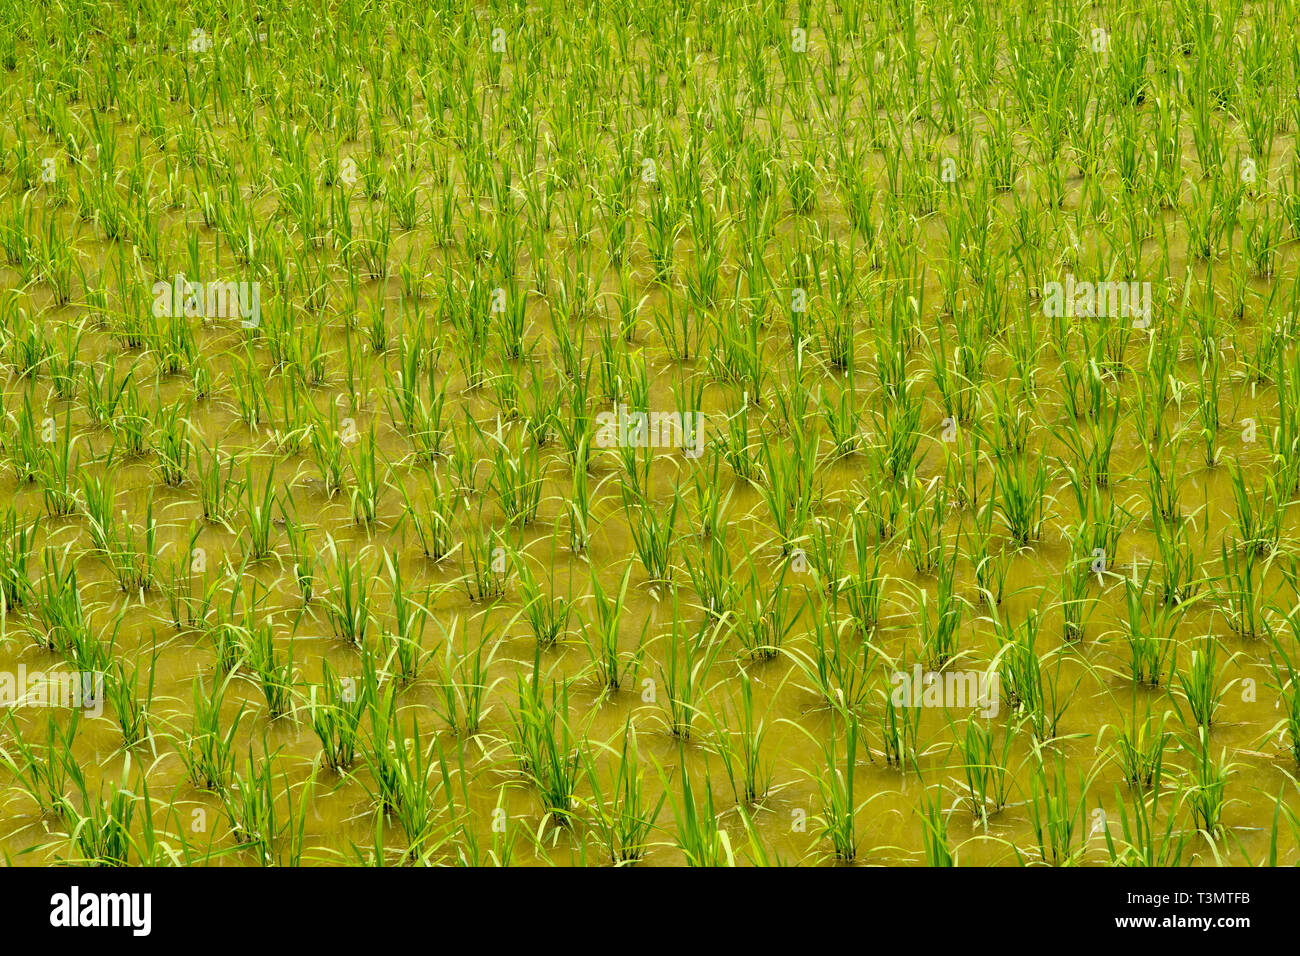 young rice plants Stock Photo